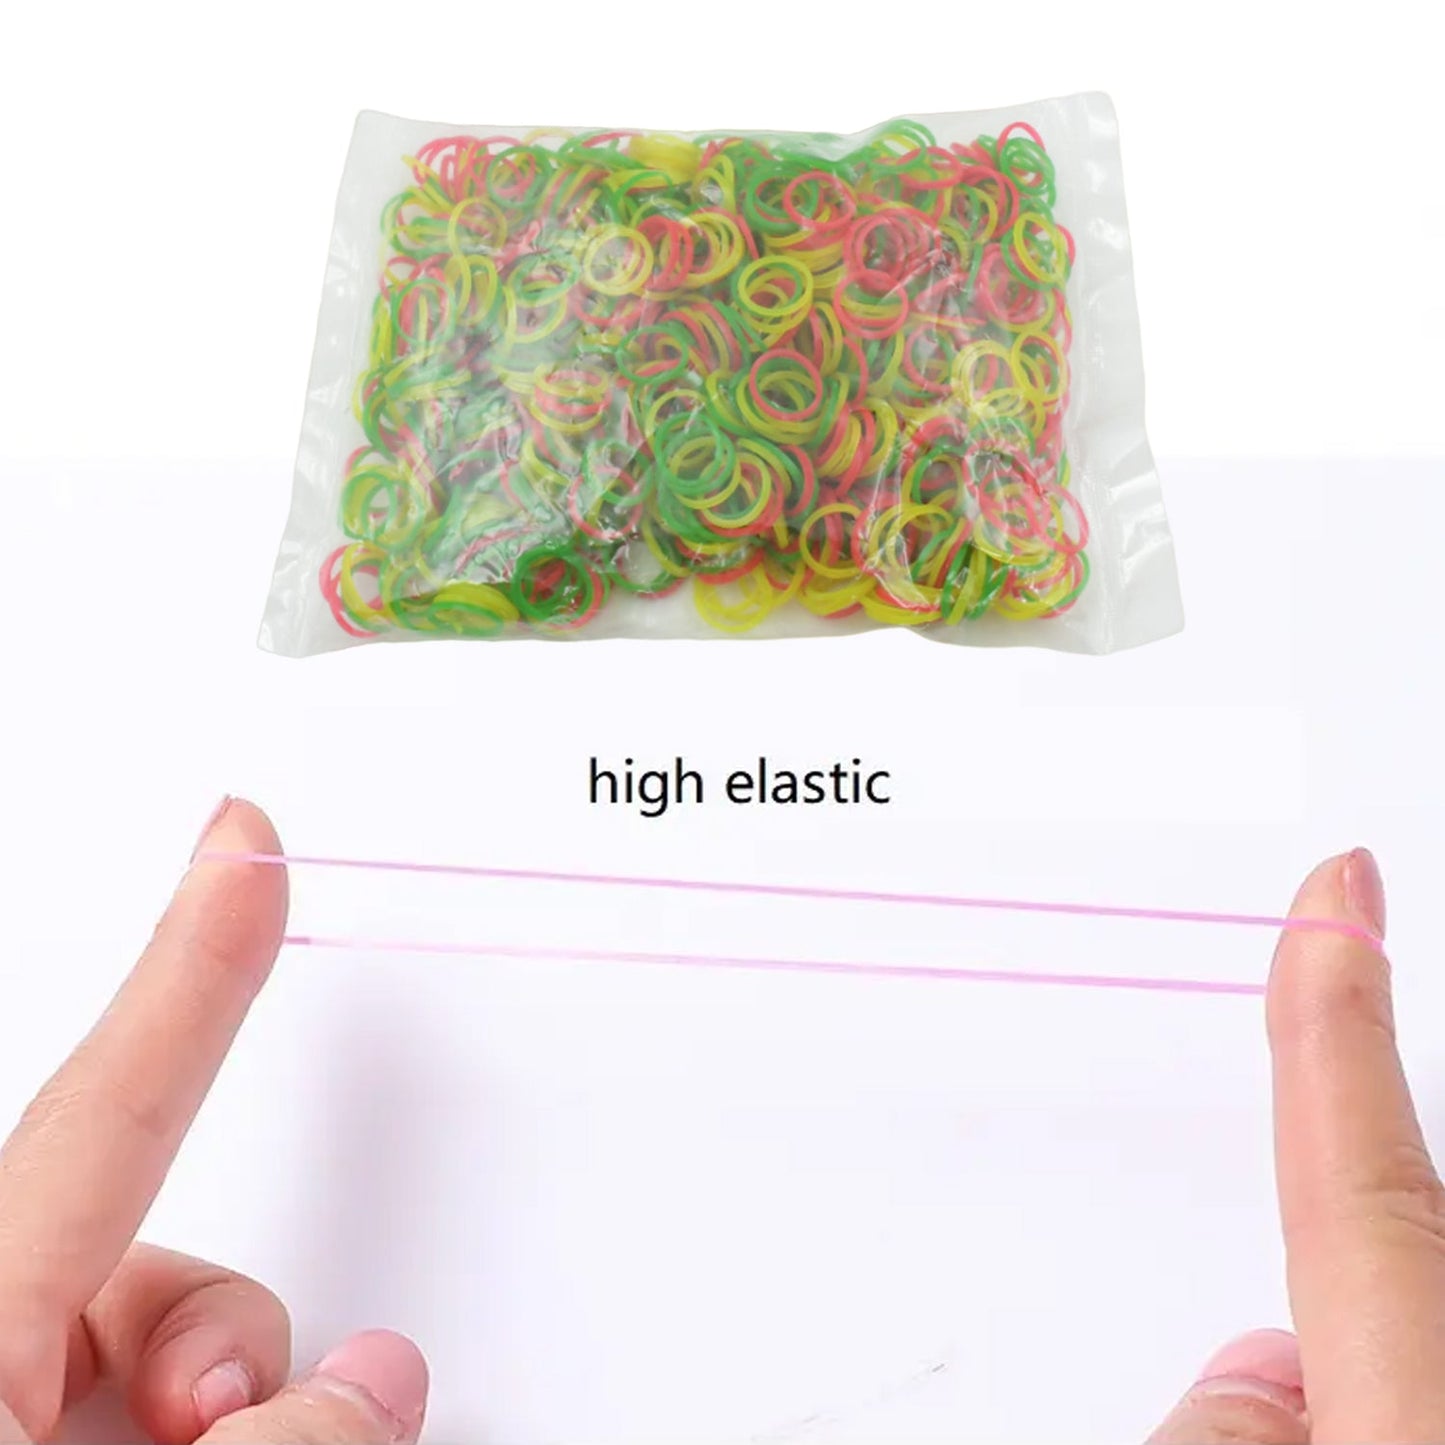 4357 Rubber Band For Office/Home and Kitchen Accessories Item Products, Elastic Rubber Bands, Flexible Reusable Nylon Elastic Unbreakable, For Stationery, School  Multicolor (1 Inch, 50 GM)